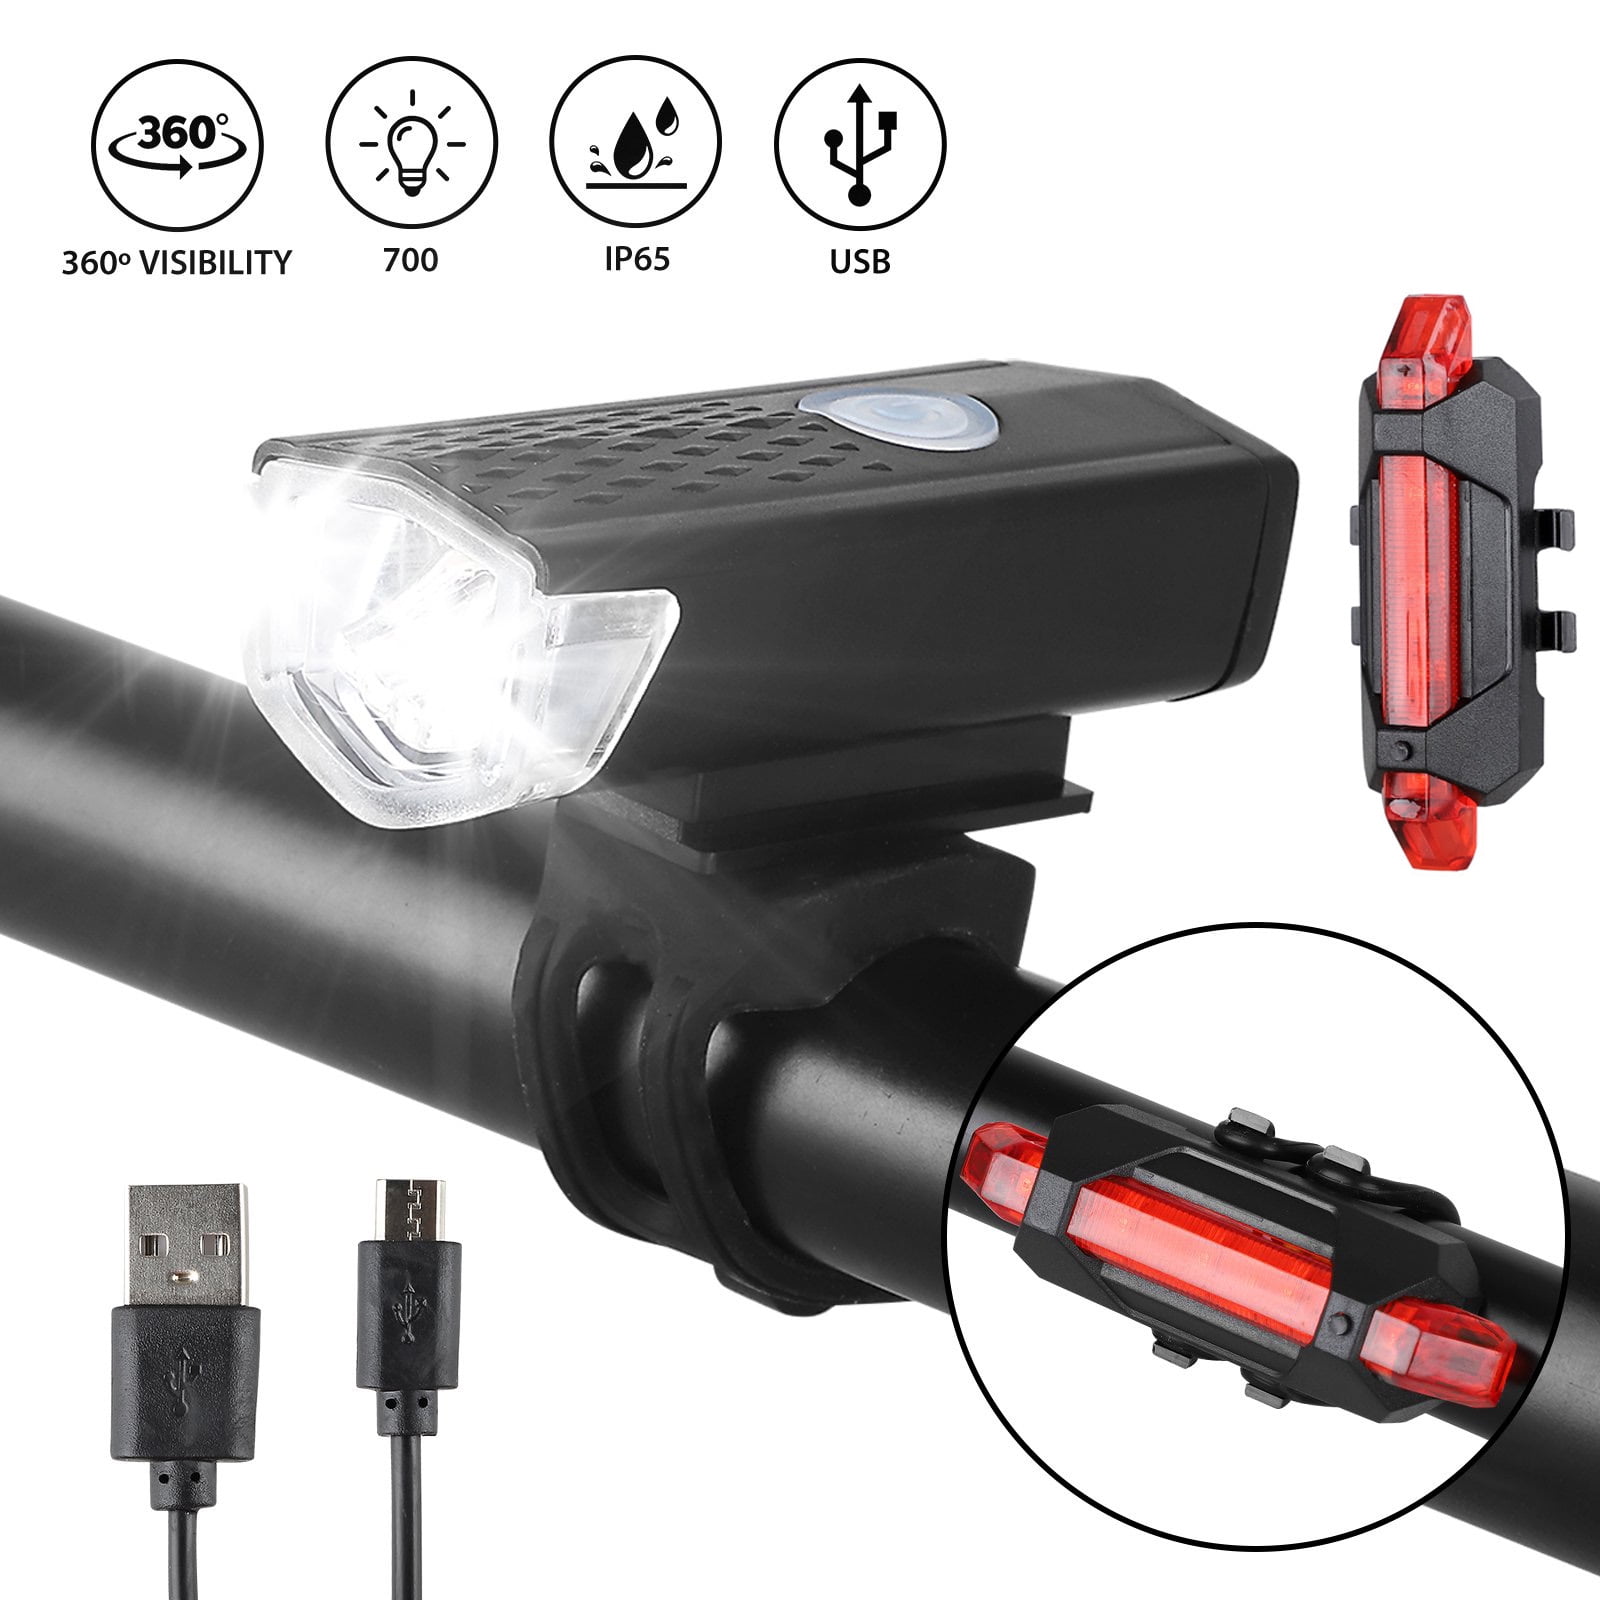 LED USB Rechargeable Bycicle Light Headlamp Bike Headlight Front Lamp Waterproof